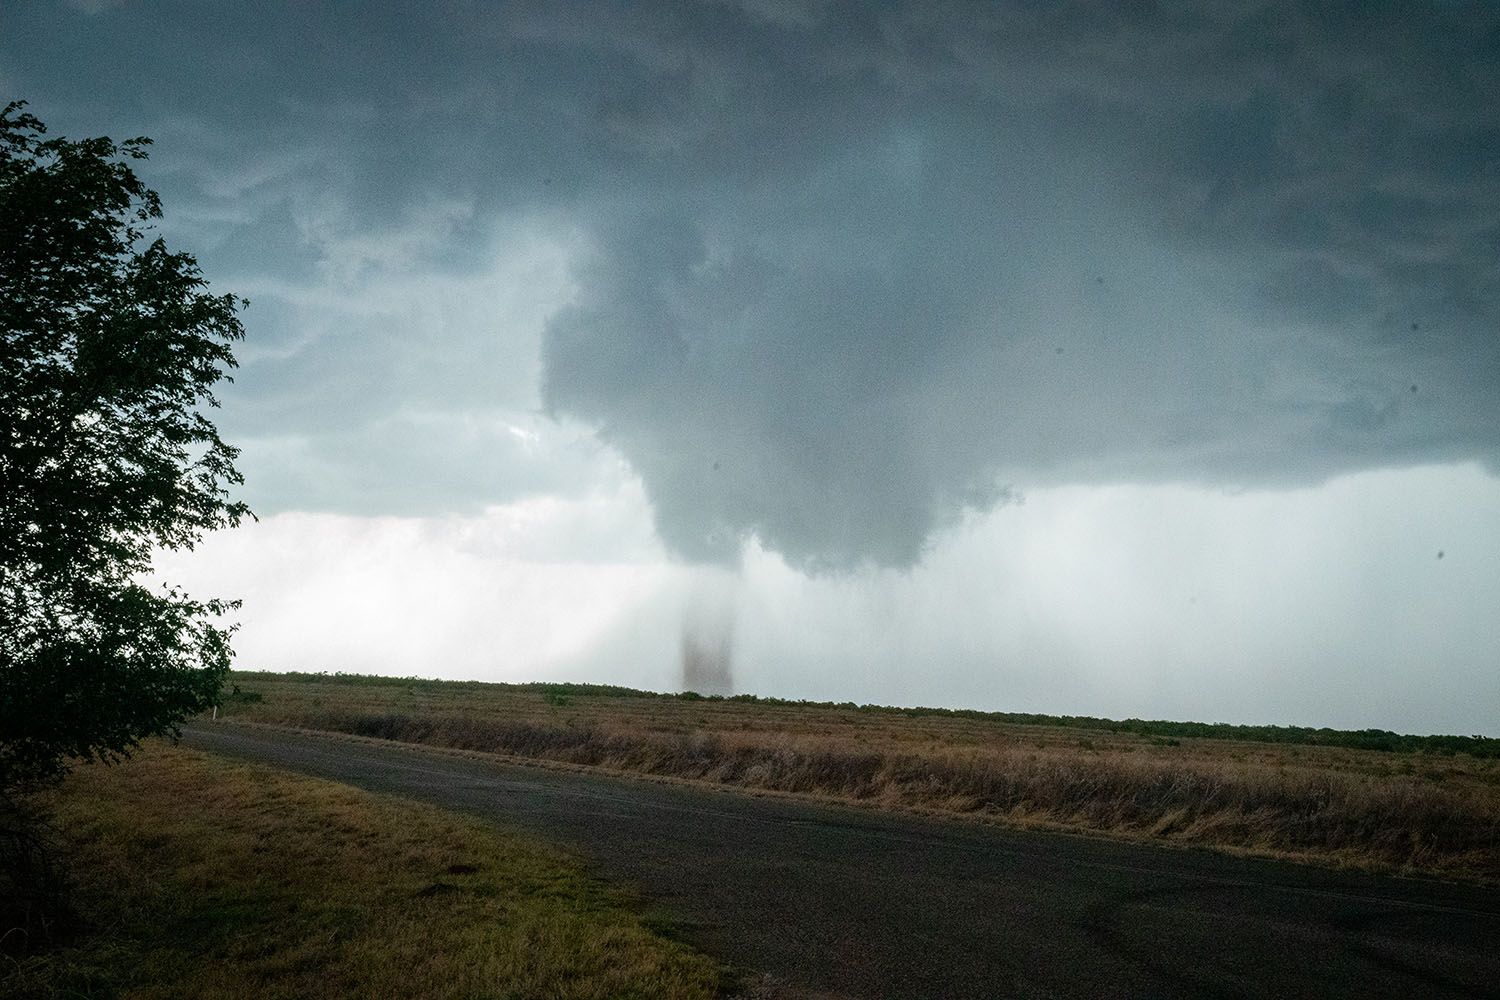 A tornado forms in Texas. “This was actually the best observation of this process I have personally had in nearly two decades of chasing because we witnessed the full range of the process.” – Dr. Jana Houser